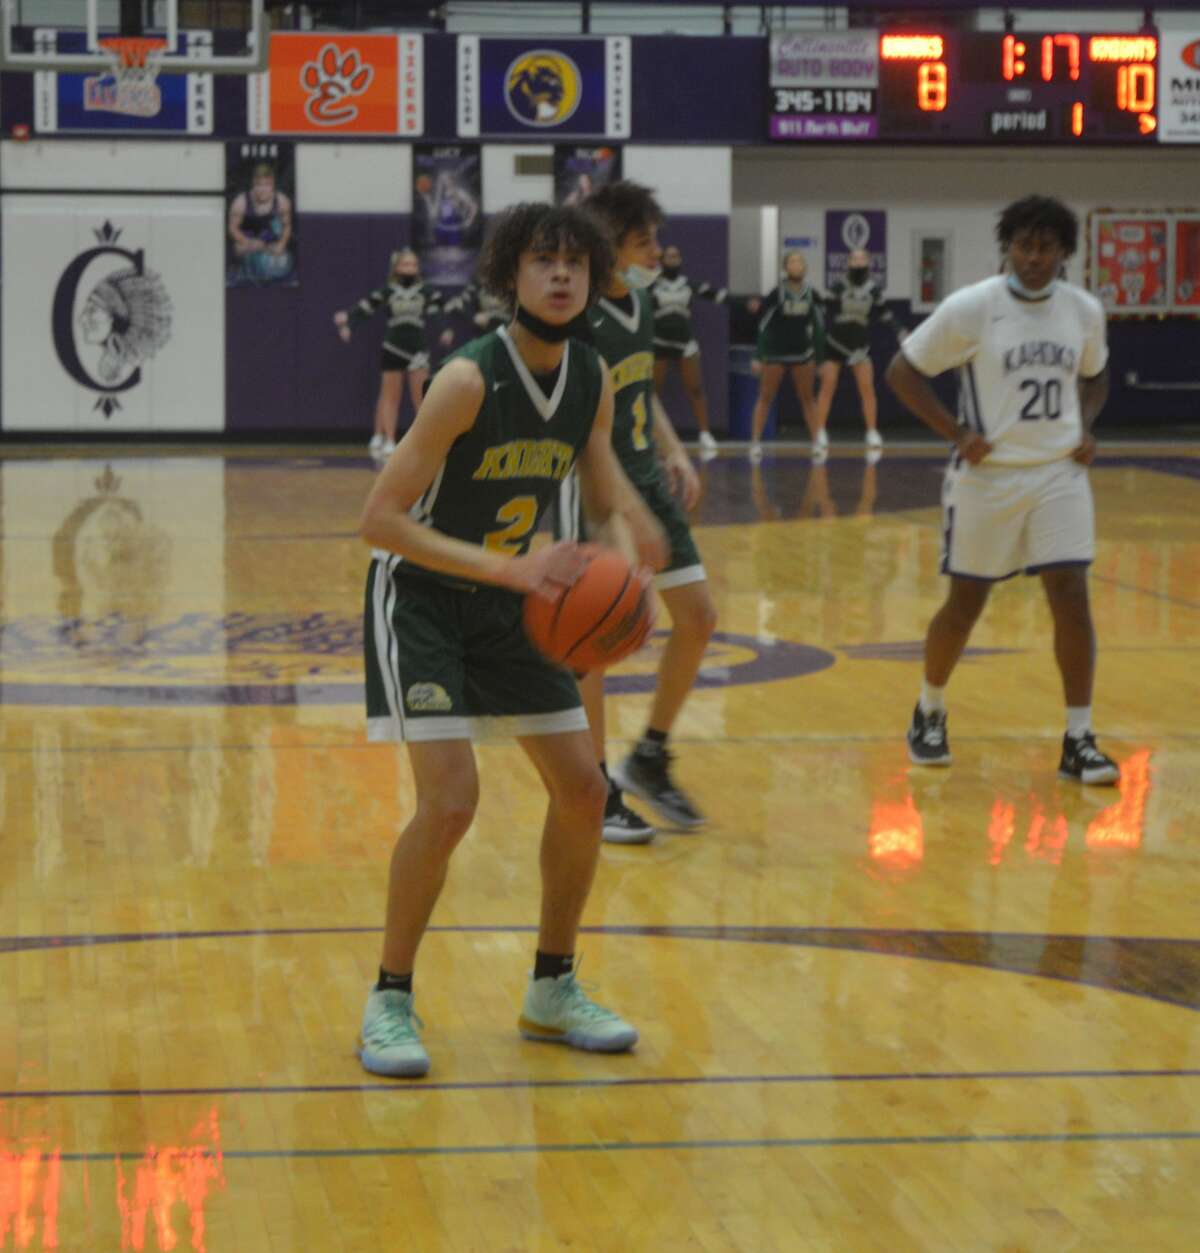 Devan Rush (2) at the free throw line against Collinsville on Saturday. Rush finished with 11 points in the 52-33 loss.